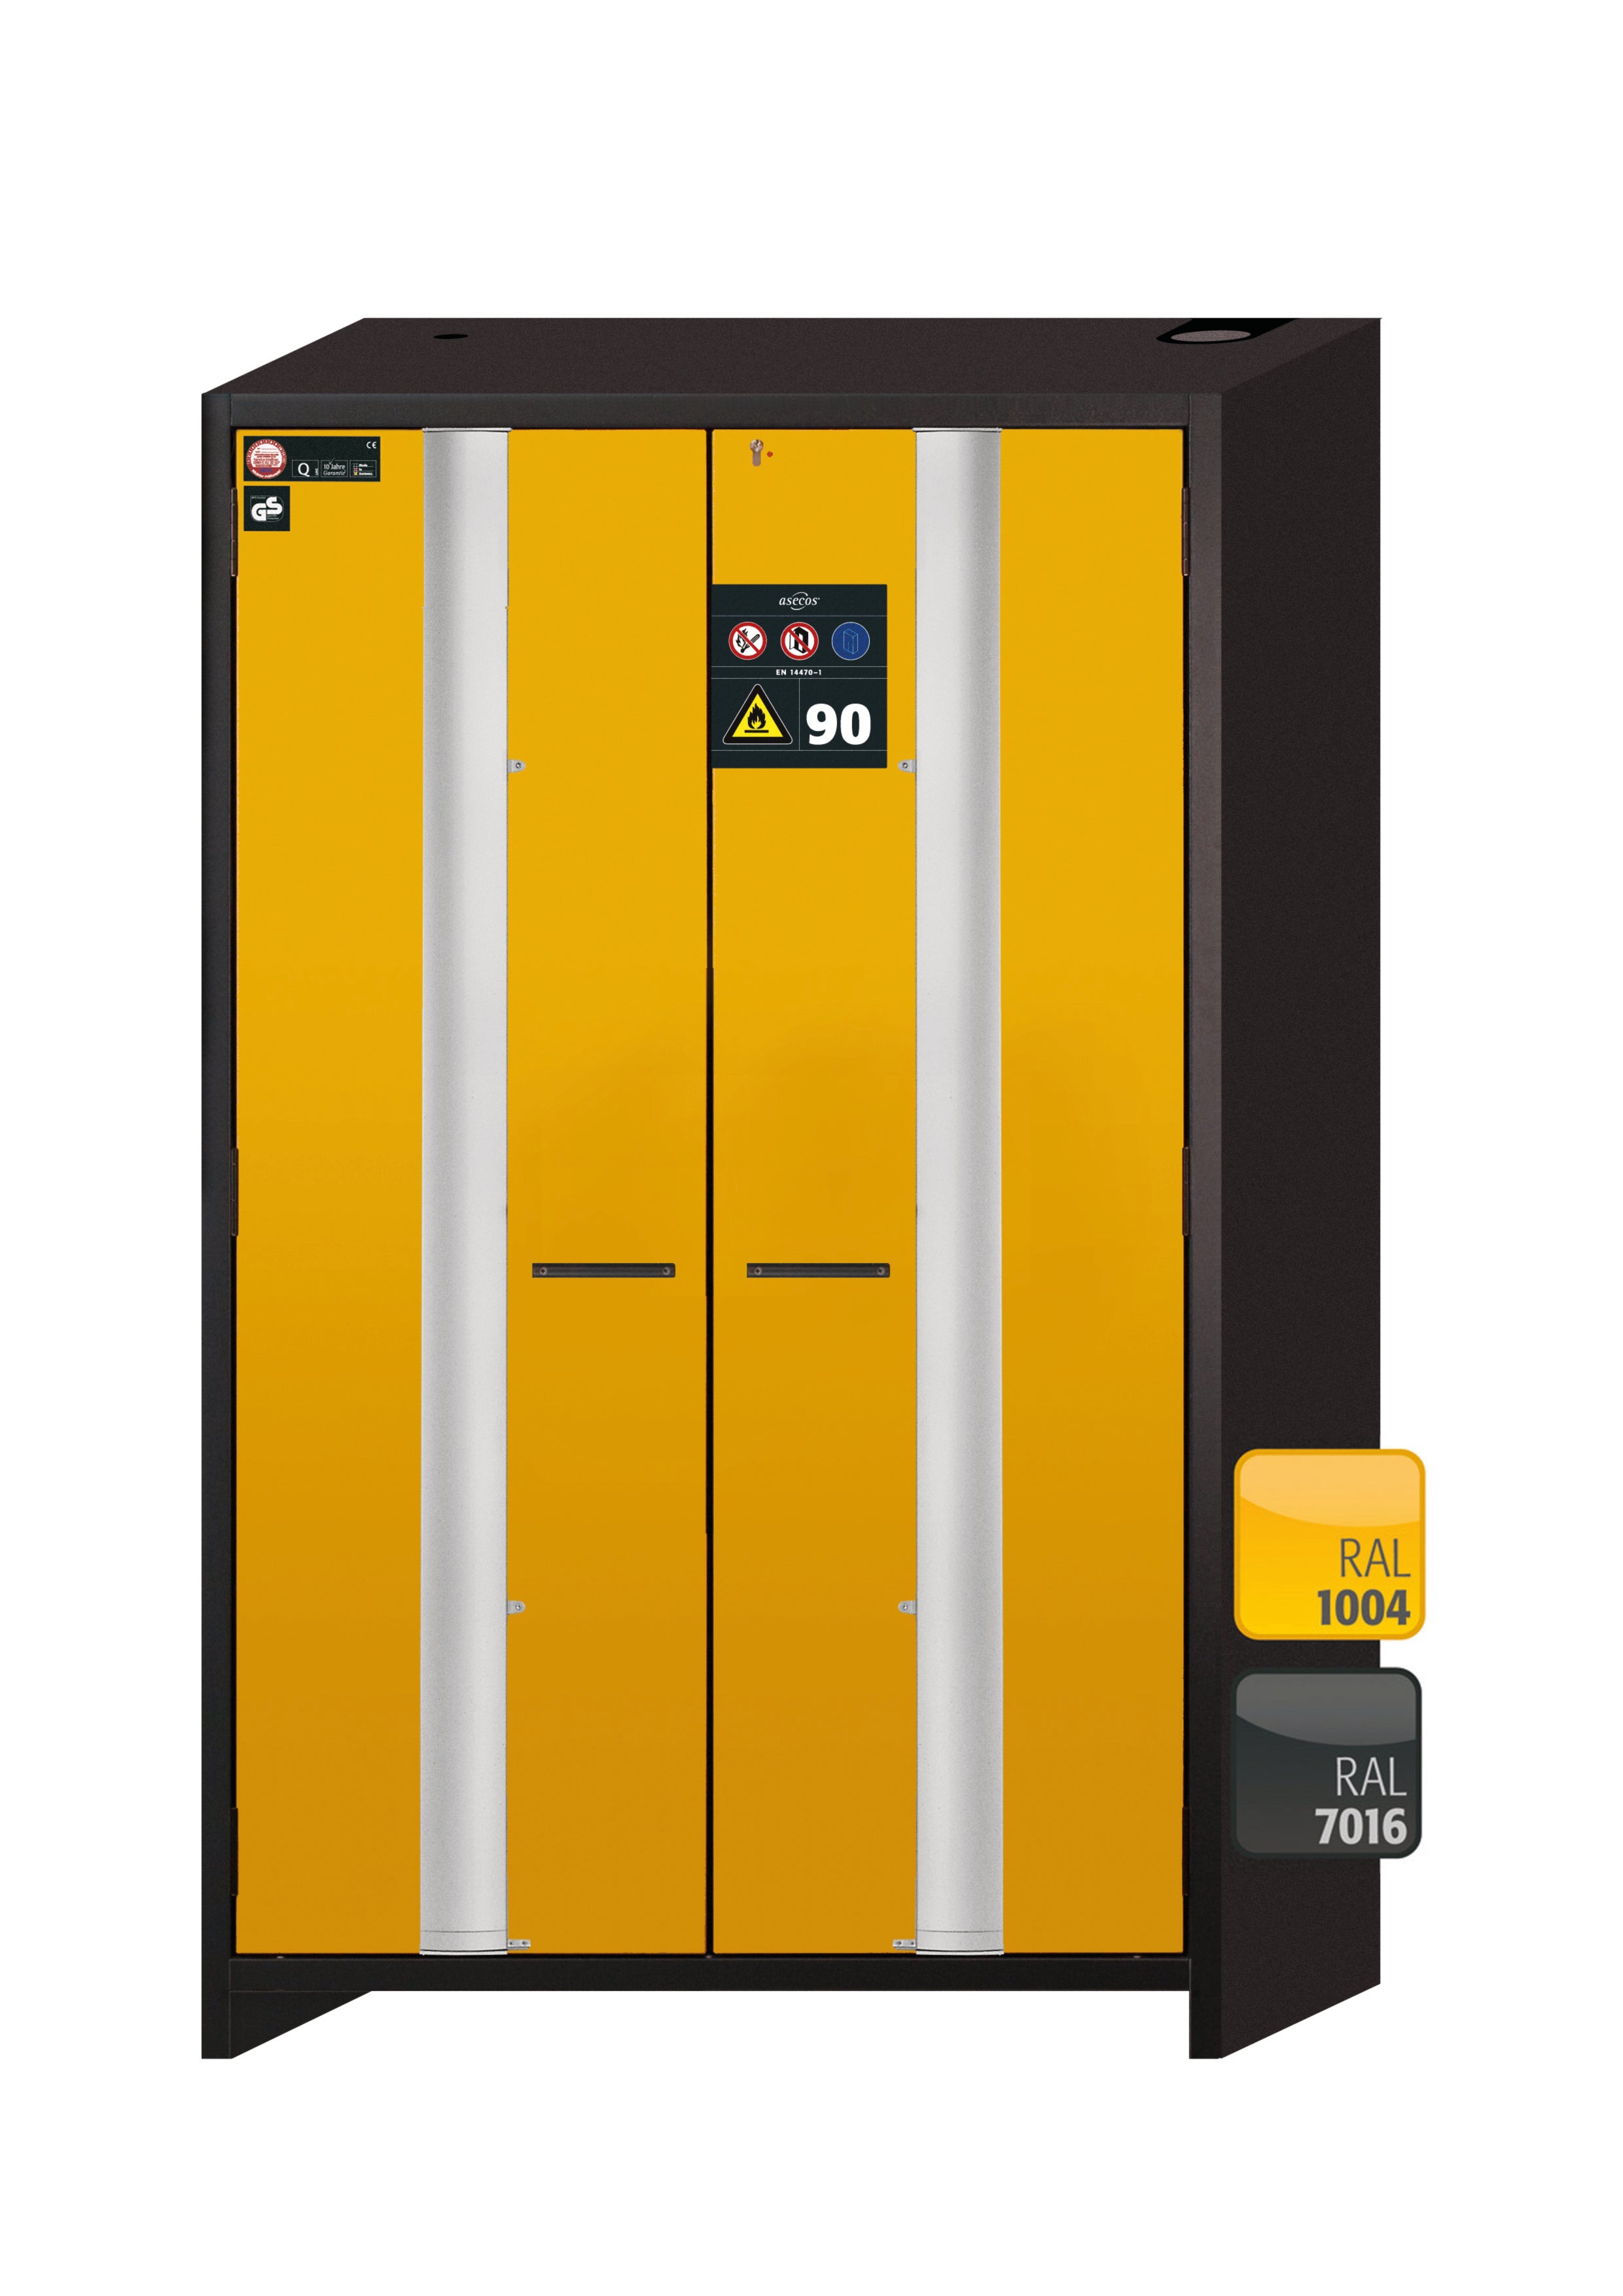 Type 90 safety cabinet Q-PHOENIX-90 model Q90.195.120.FD in safety yellow RAL 1004 with 3x standard pull-out tray (stainless steel 1.4301)